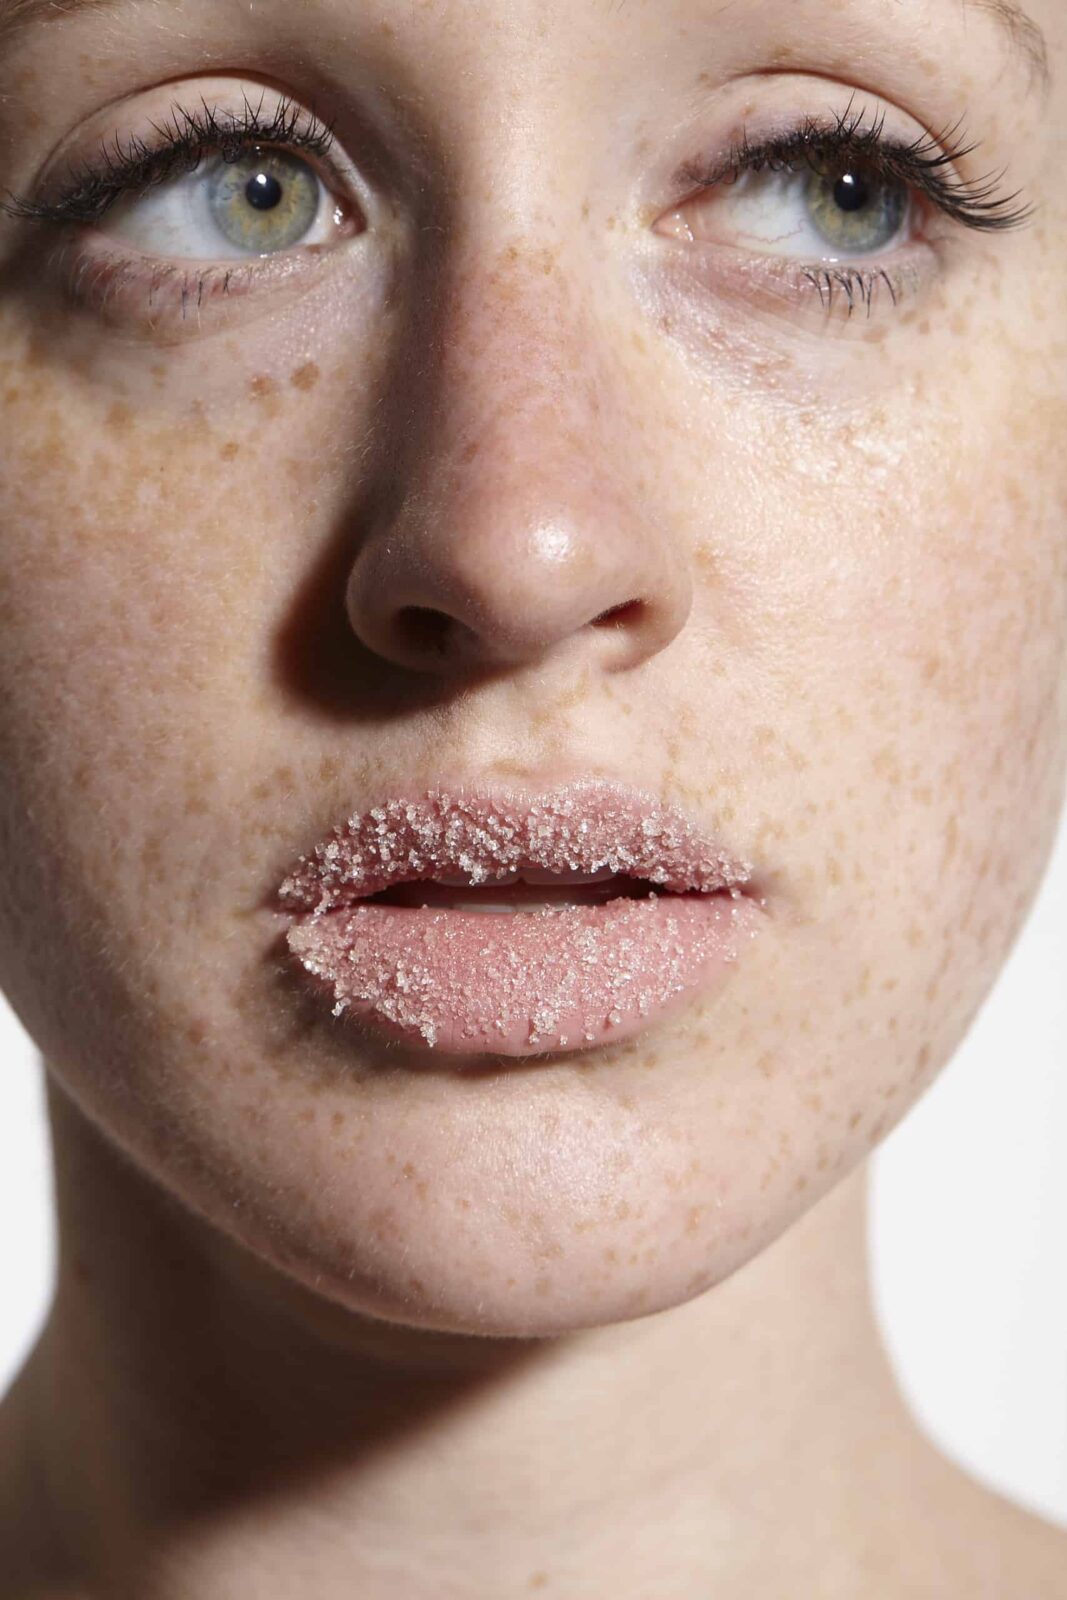 How Redheads Can Exfoliate Their Lips